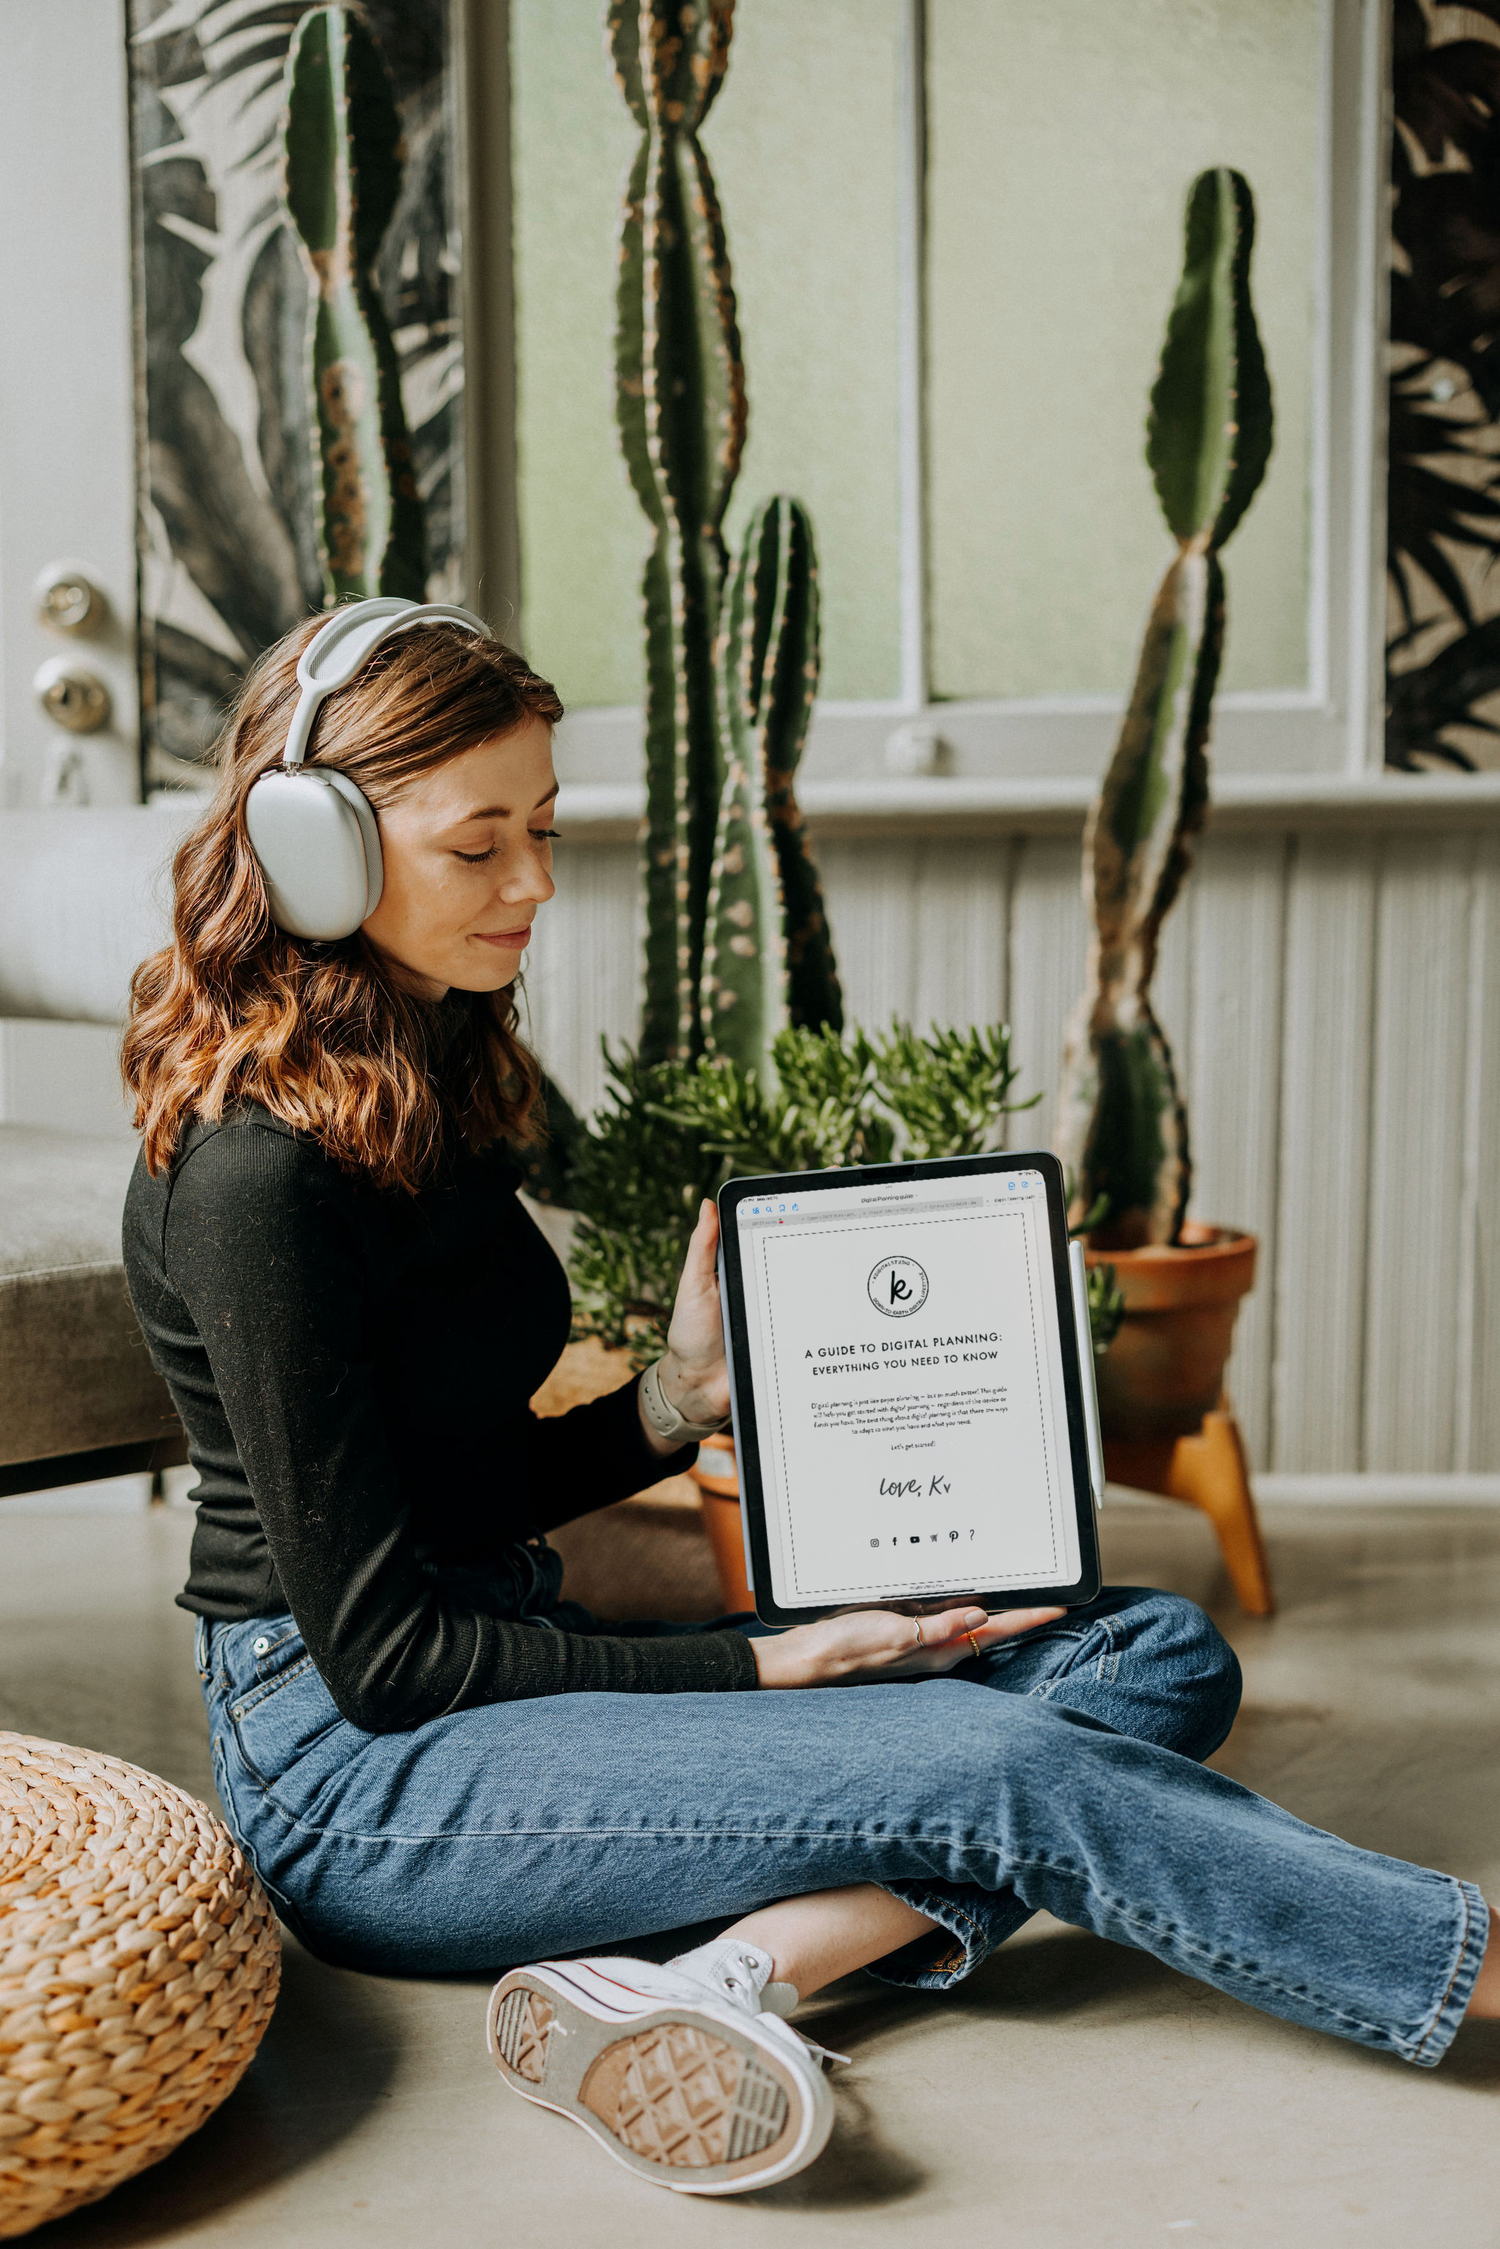 Kirstin from KDigitalStudio is sitting in front of large cactus plants, wearing headphones and holding her iPad, which shows a guide for digital planning.